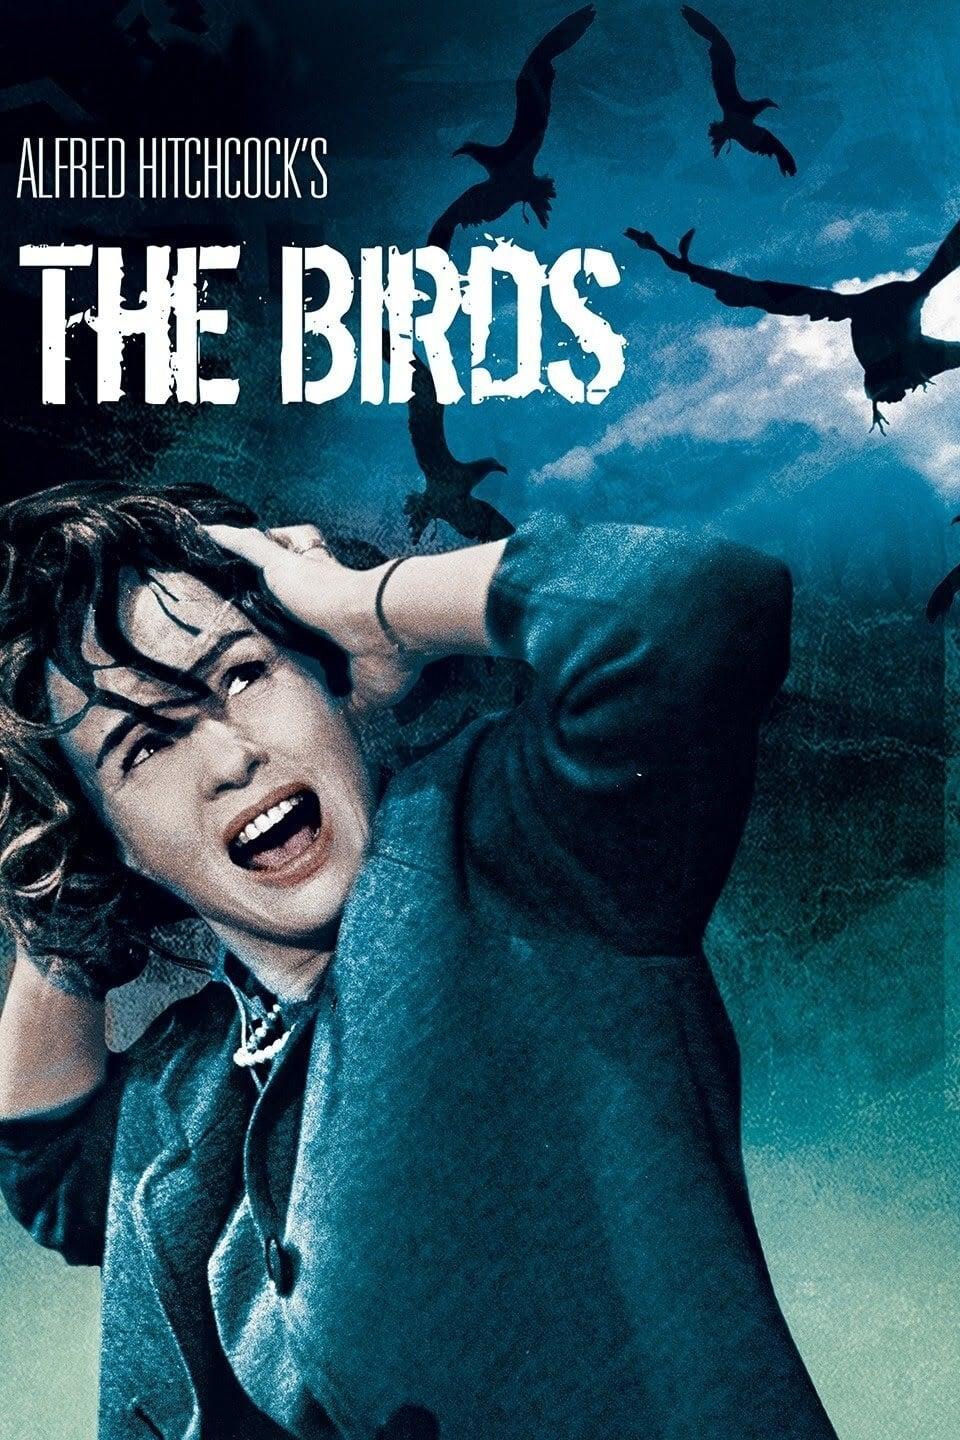 The Birds poster